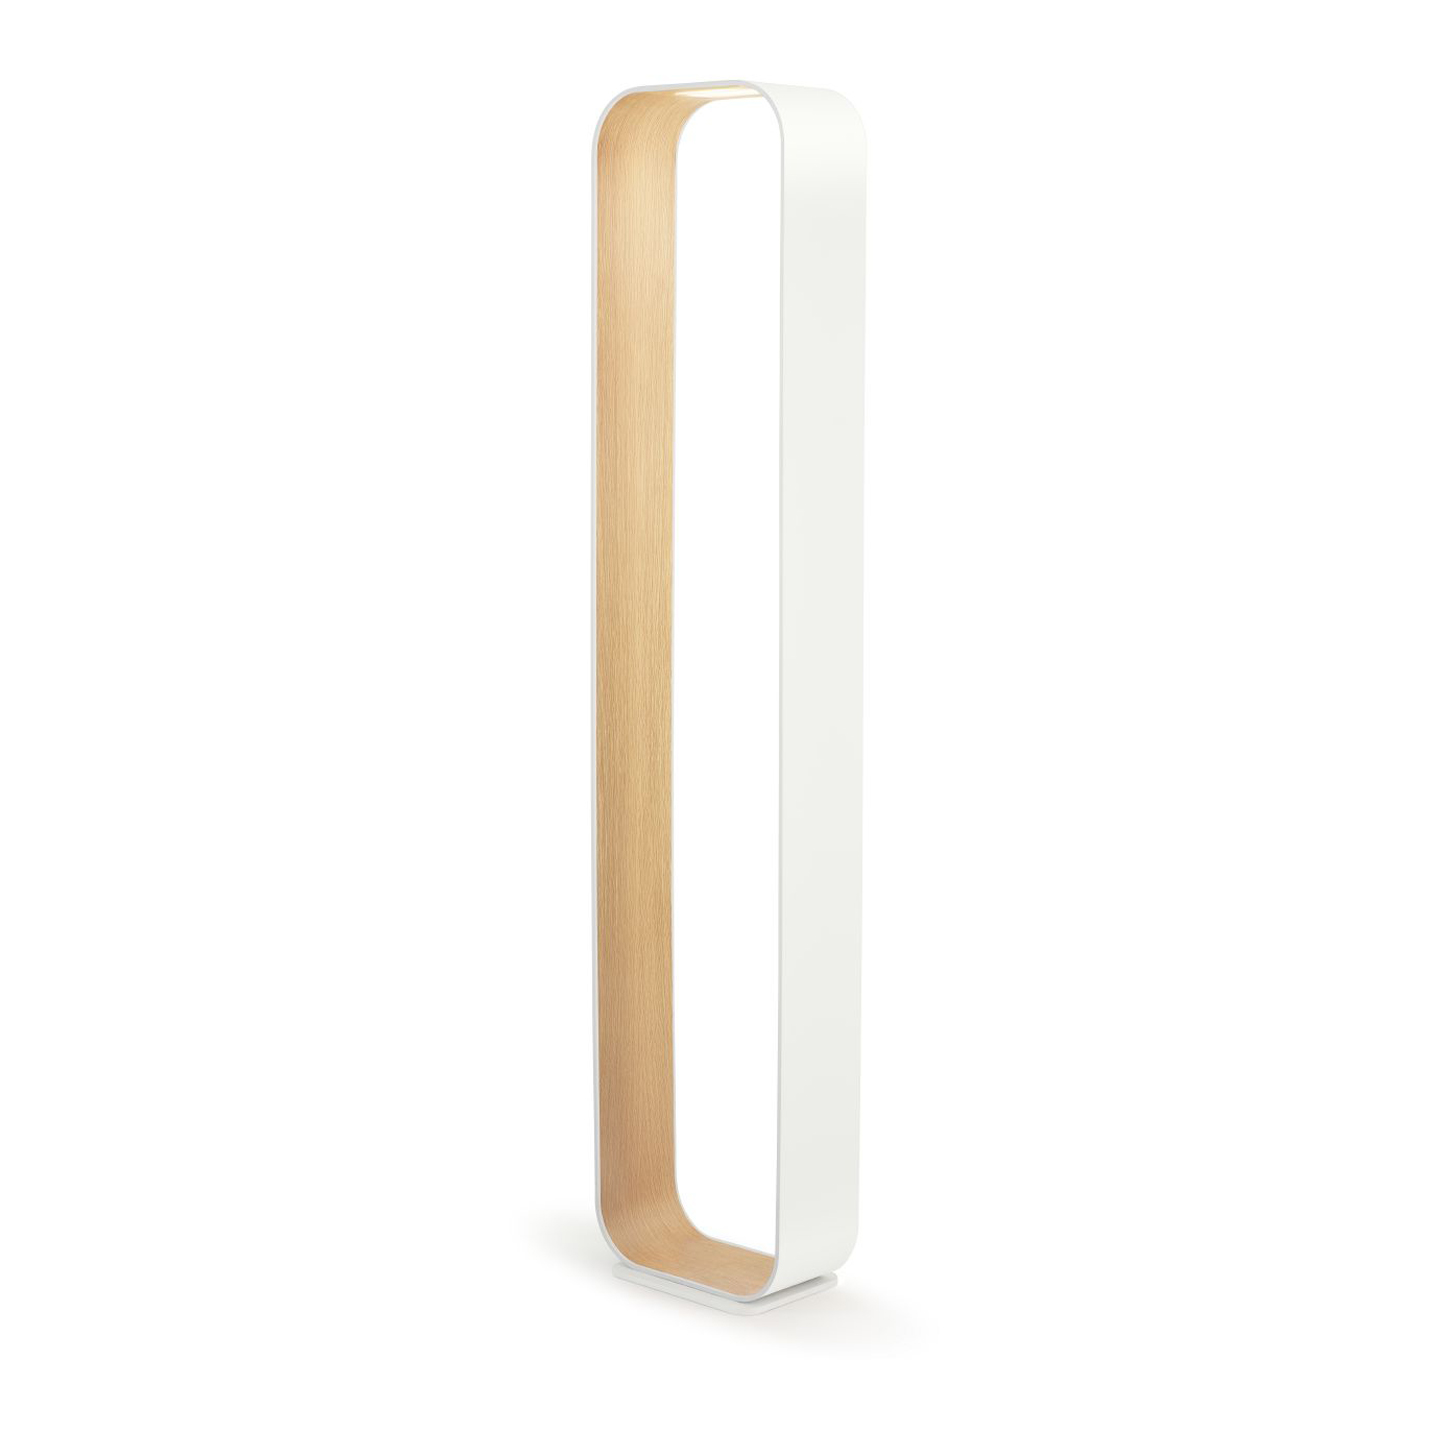 Haworth Contour Lighting with circular shape and white color with wood finish